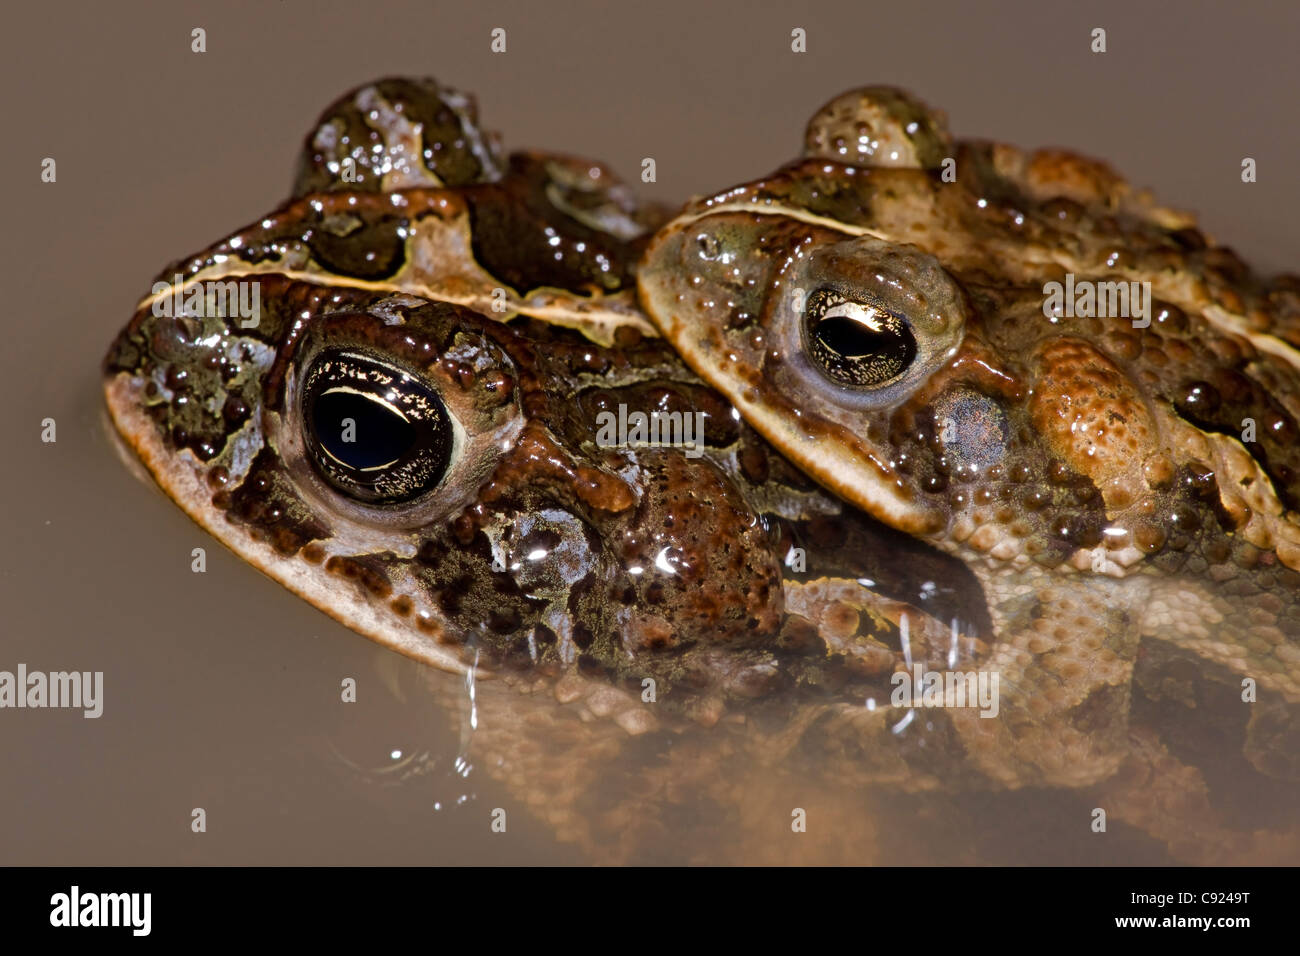 Southern Roundgland Toads - (Incilius coccifer) - Costa Rica - pair in amplexus - Tropical dry forest - Stock Photo